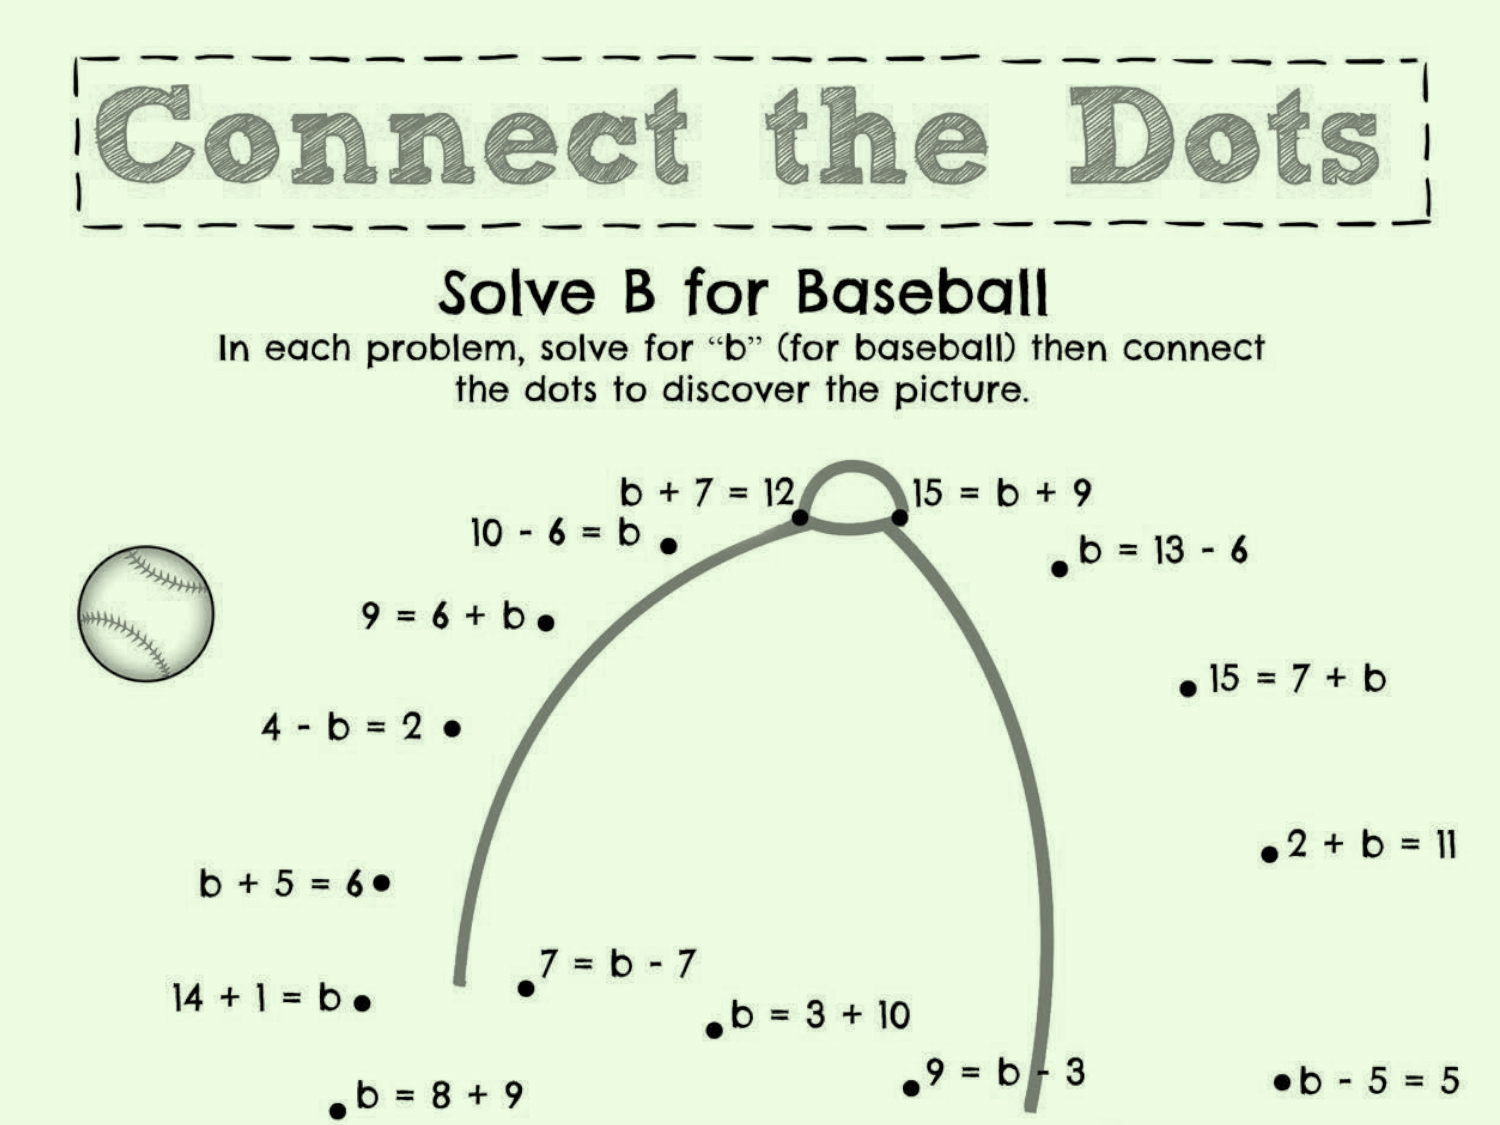 have-your-baseball-fan-take-a-swing-at-solving-the-simple-math-equations-to-unveil-a-hidden